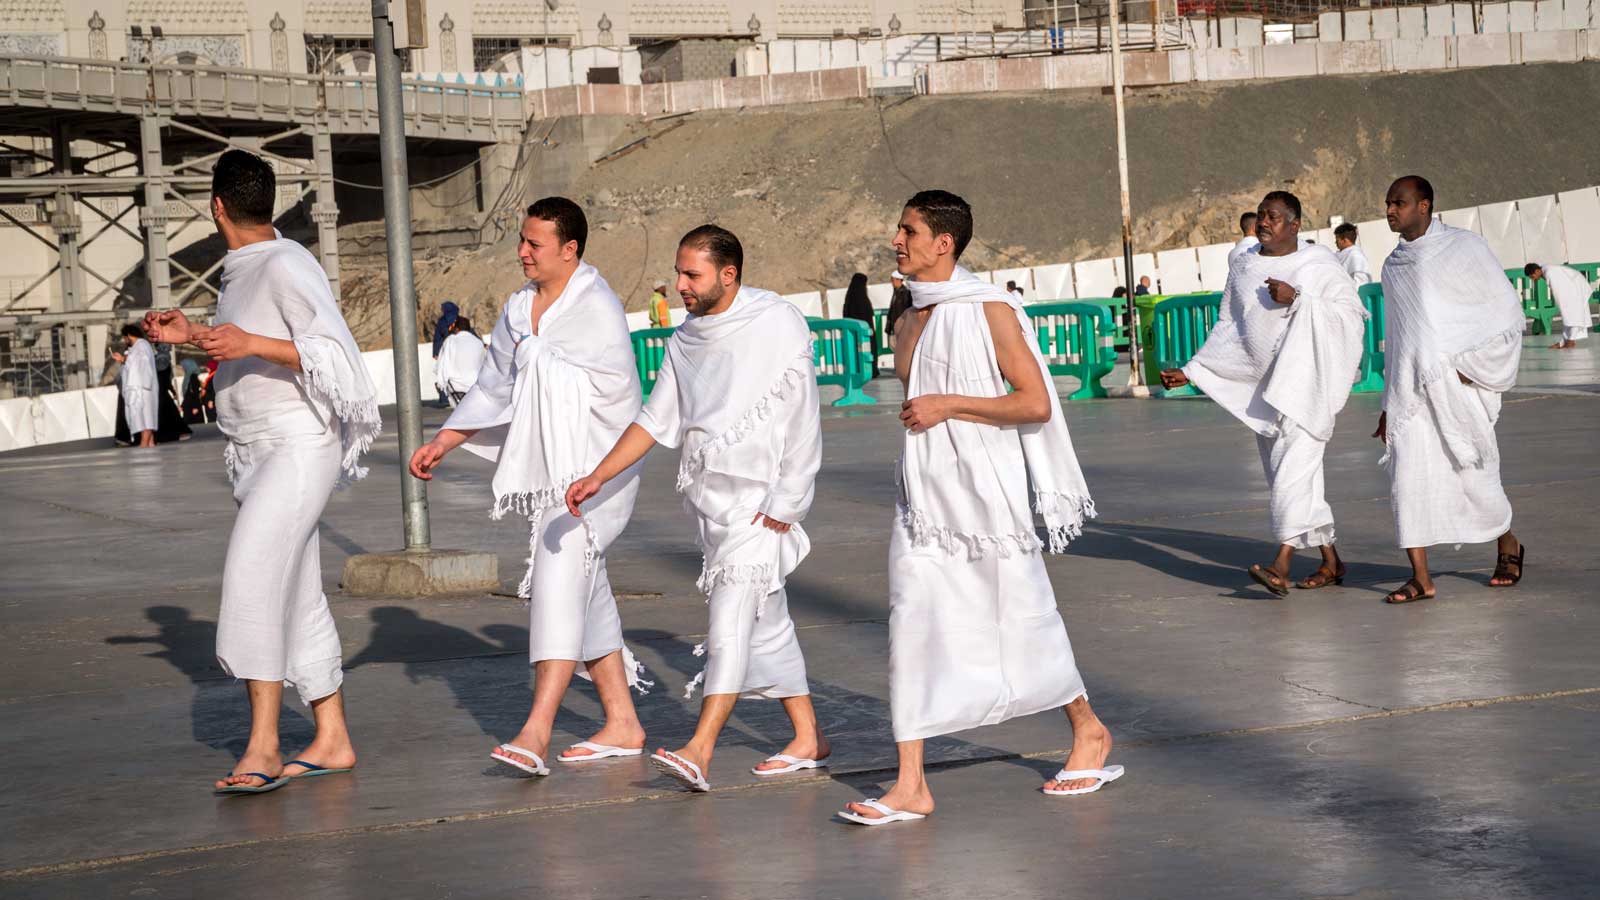 Performing Hajj: What Is the Reward?